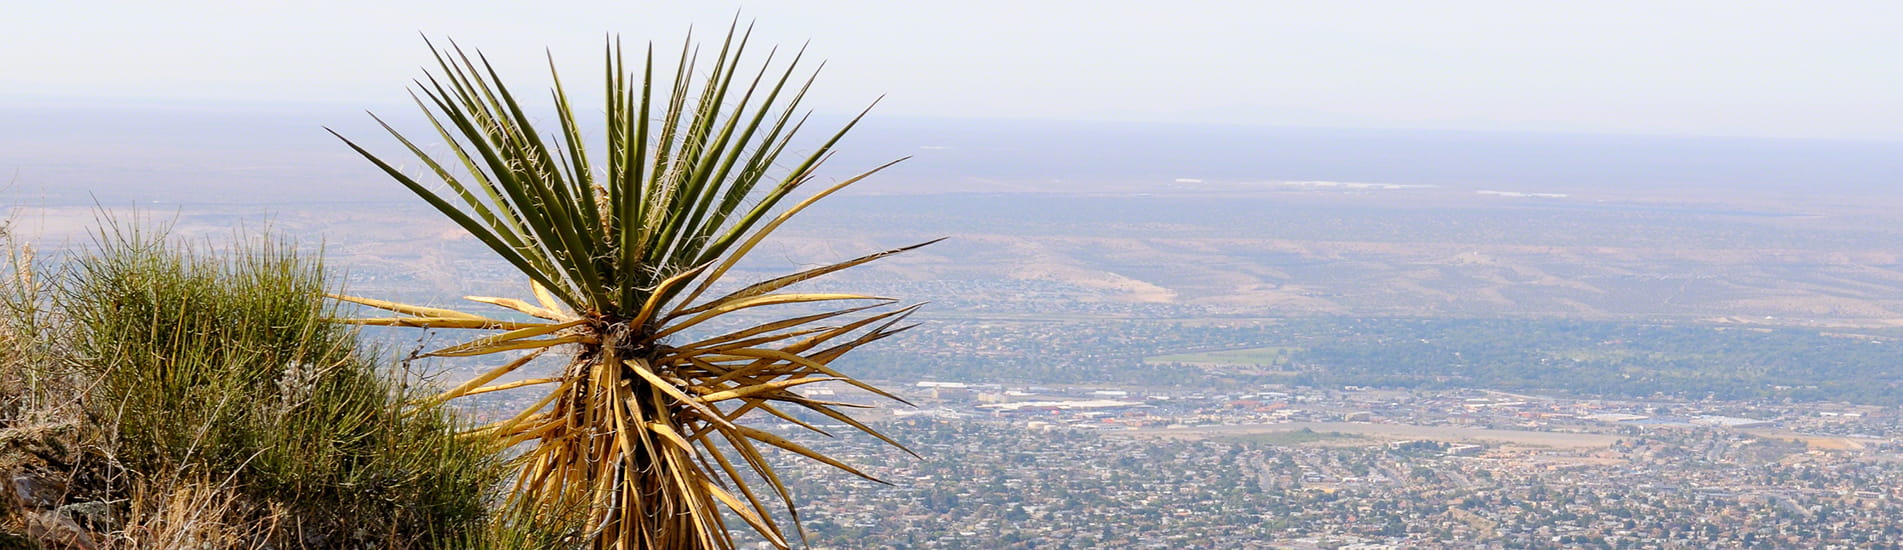 Overlooking a city in the valley with a palm tree and bush in the foreground.